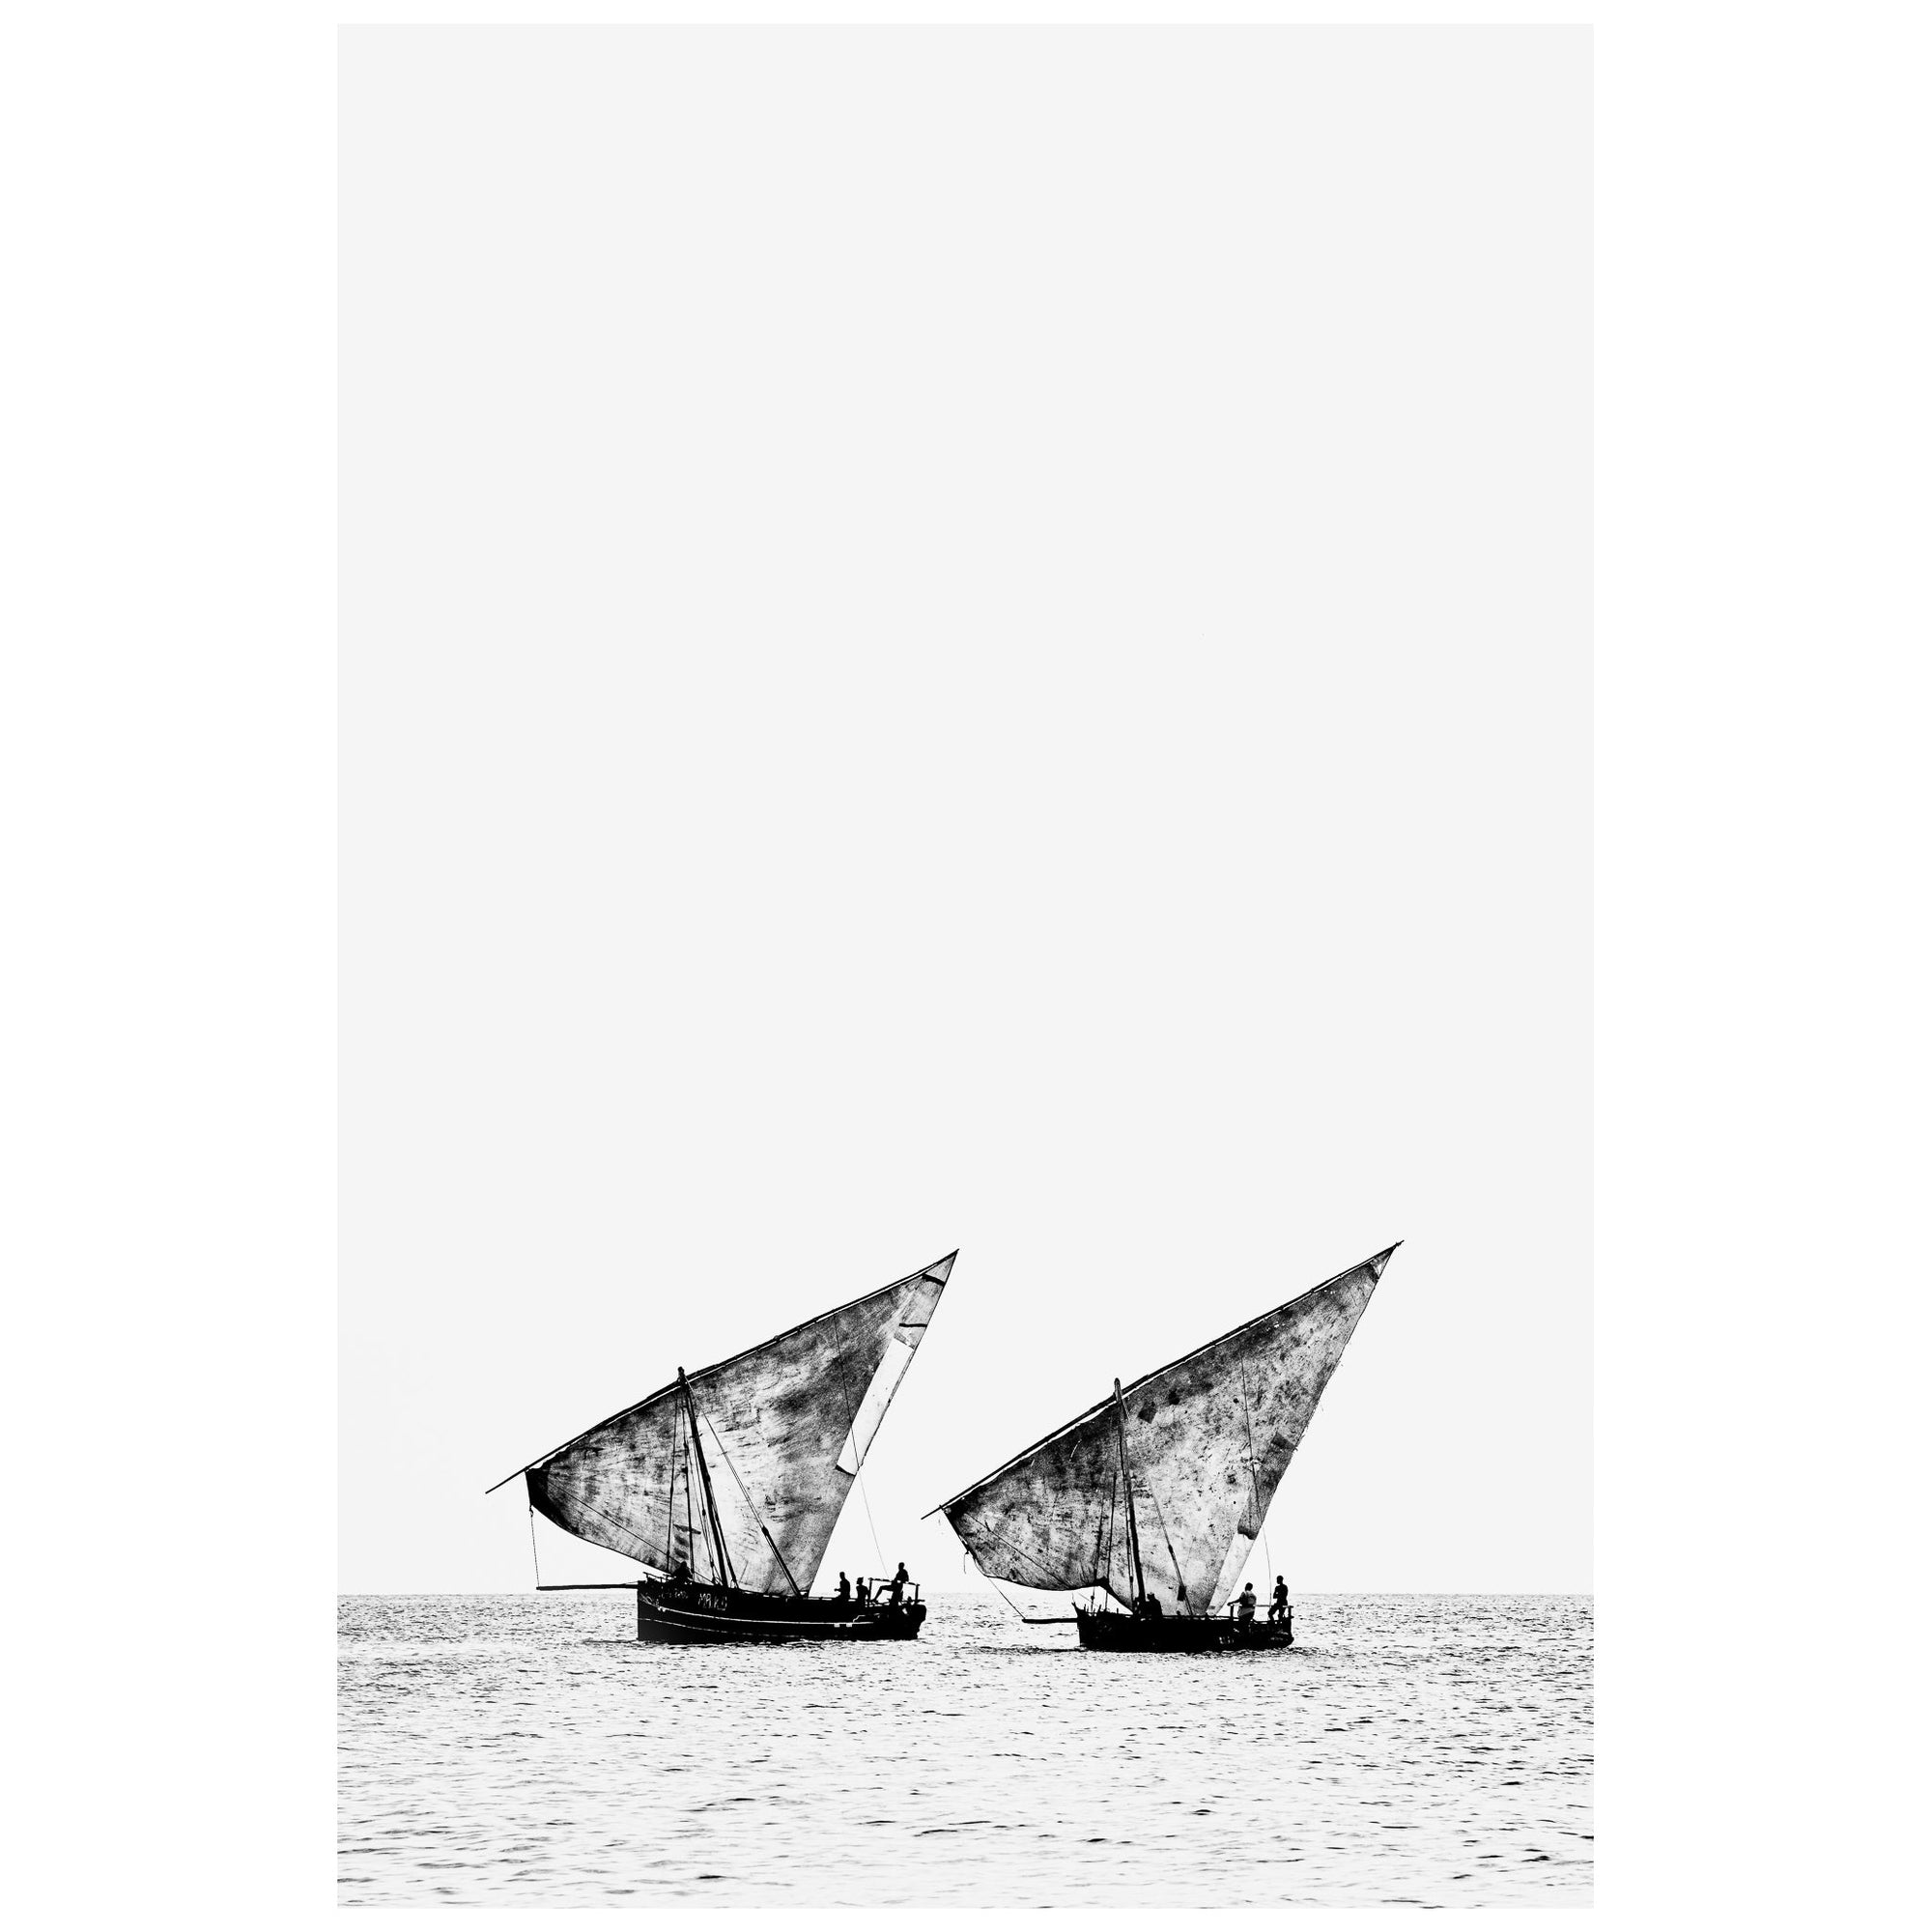 dhow_20journey_20_dhows13.jpg